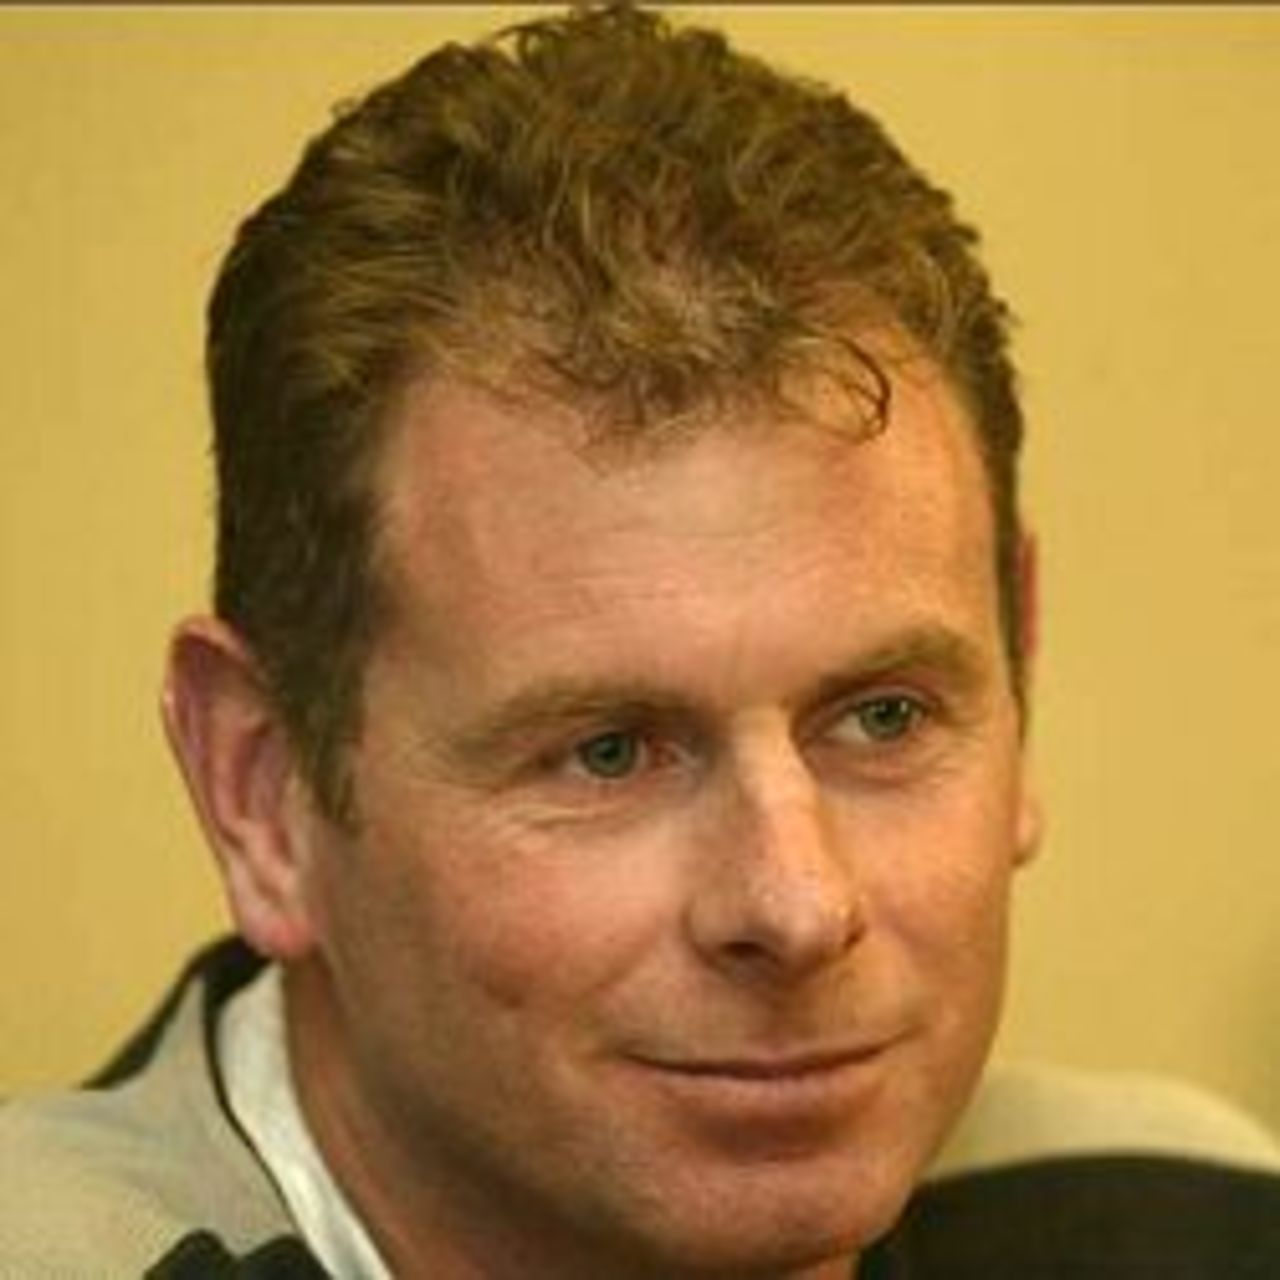 Former Australian and Victorian cricketer Paul Reiffel at announcement that he is becoming an umpire, held at the ACB Offices, Melbourne, Australia on July 10, 2002.